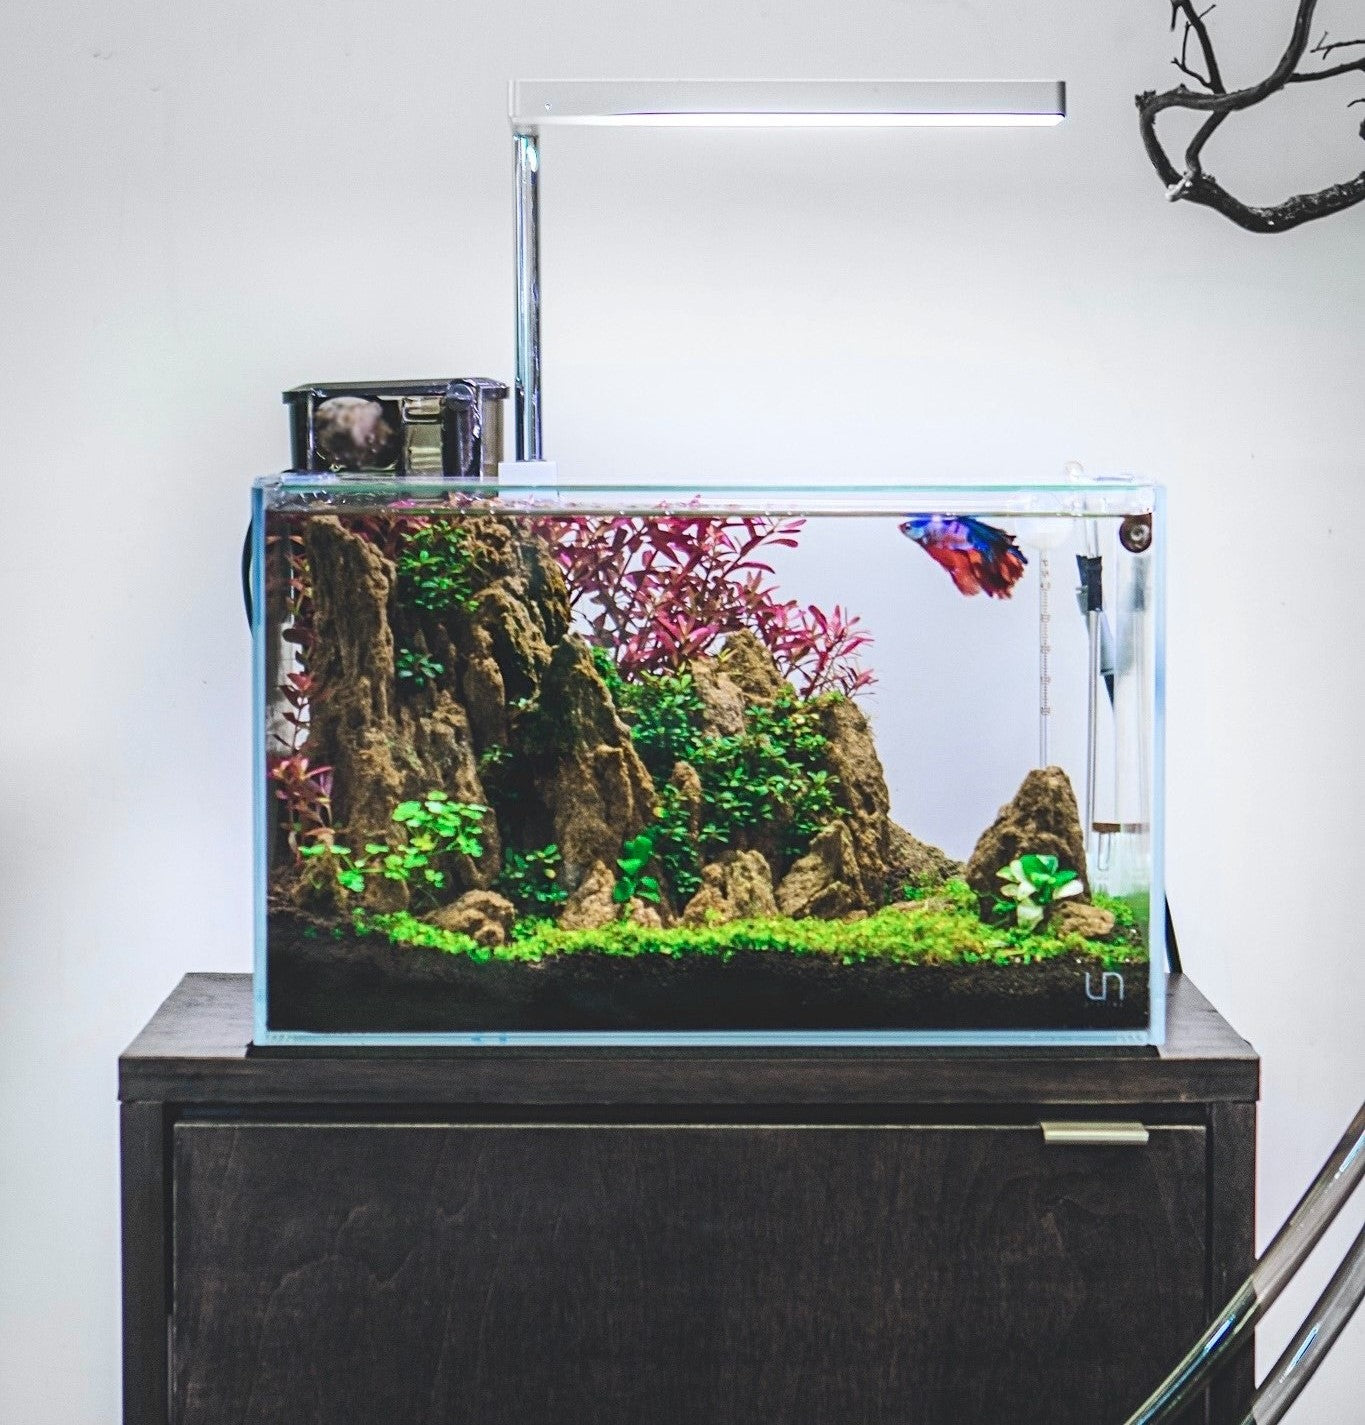 Keeping Bettas: Why You Need a Planted Tank